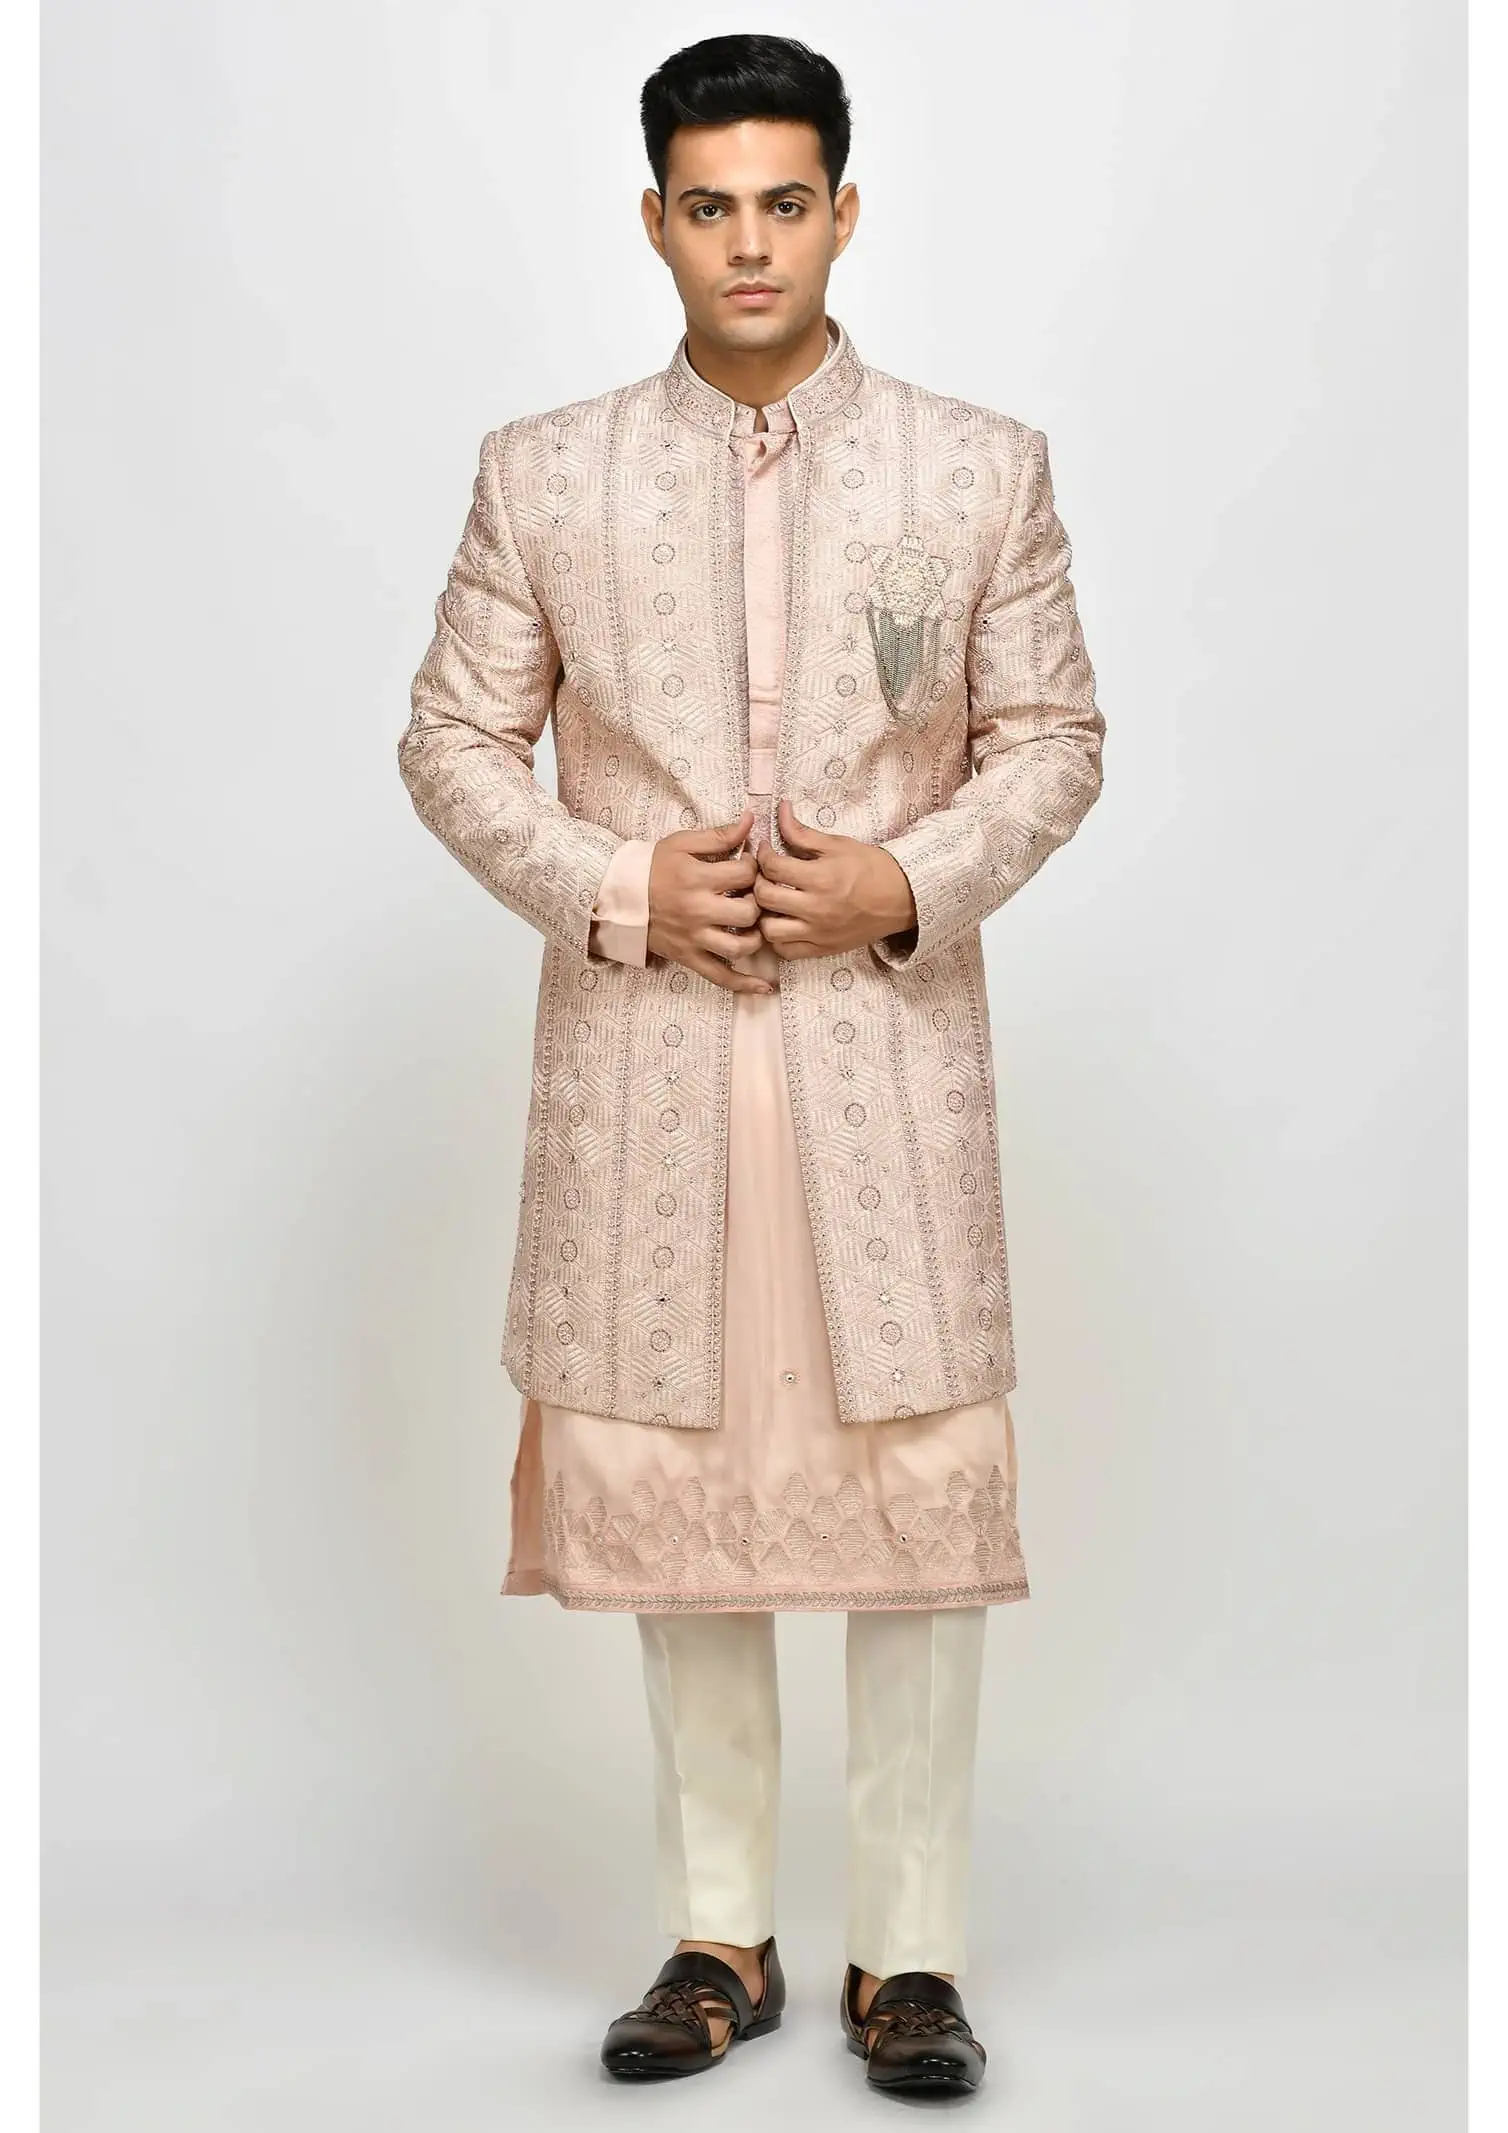 Blush pink Achkan with Ivory pants